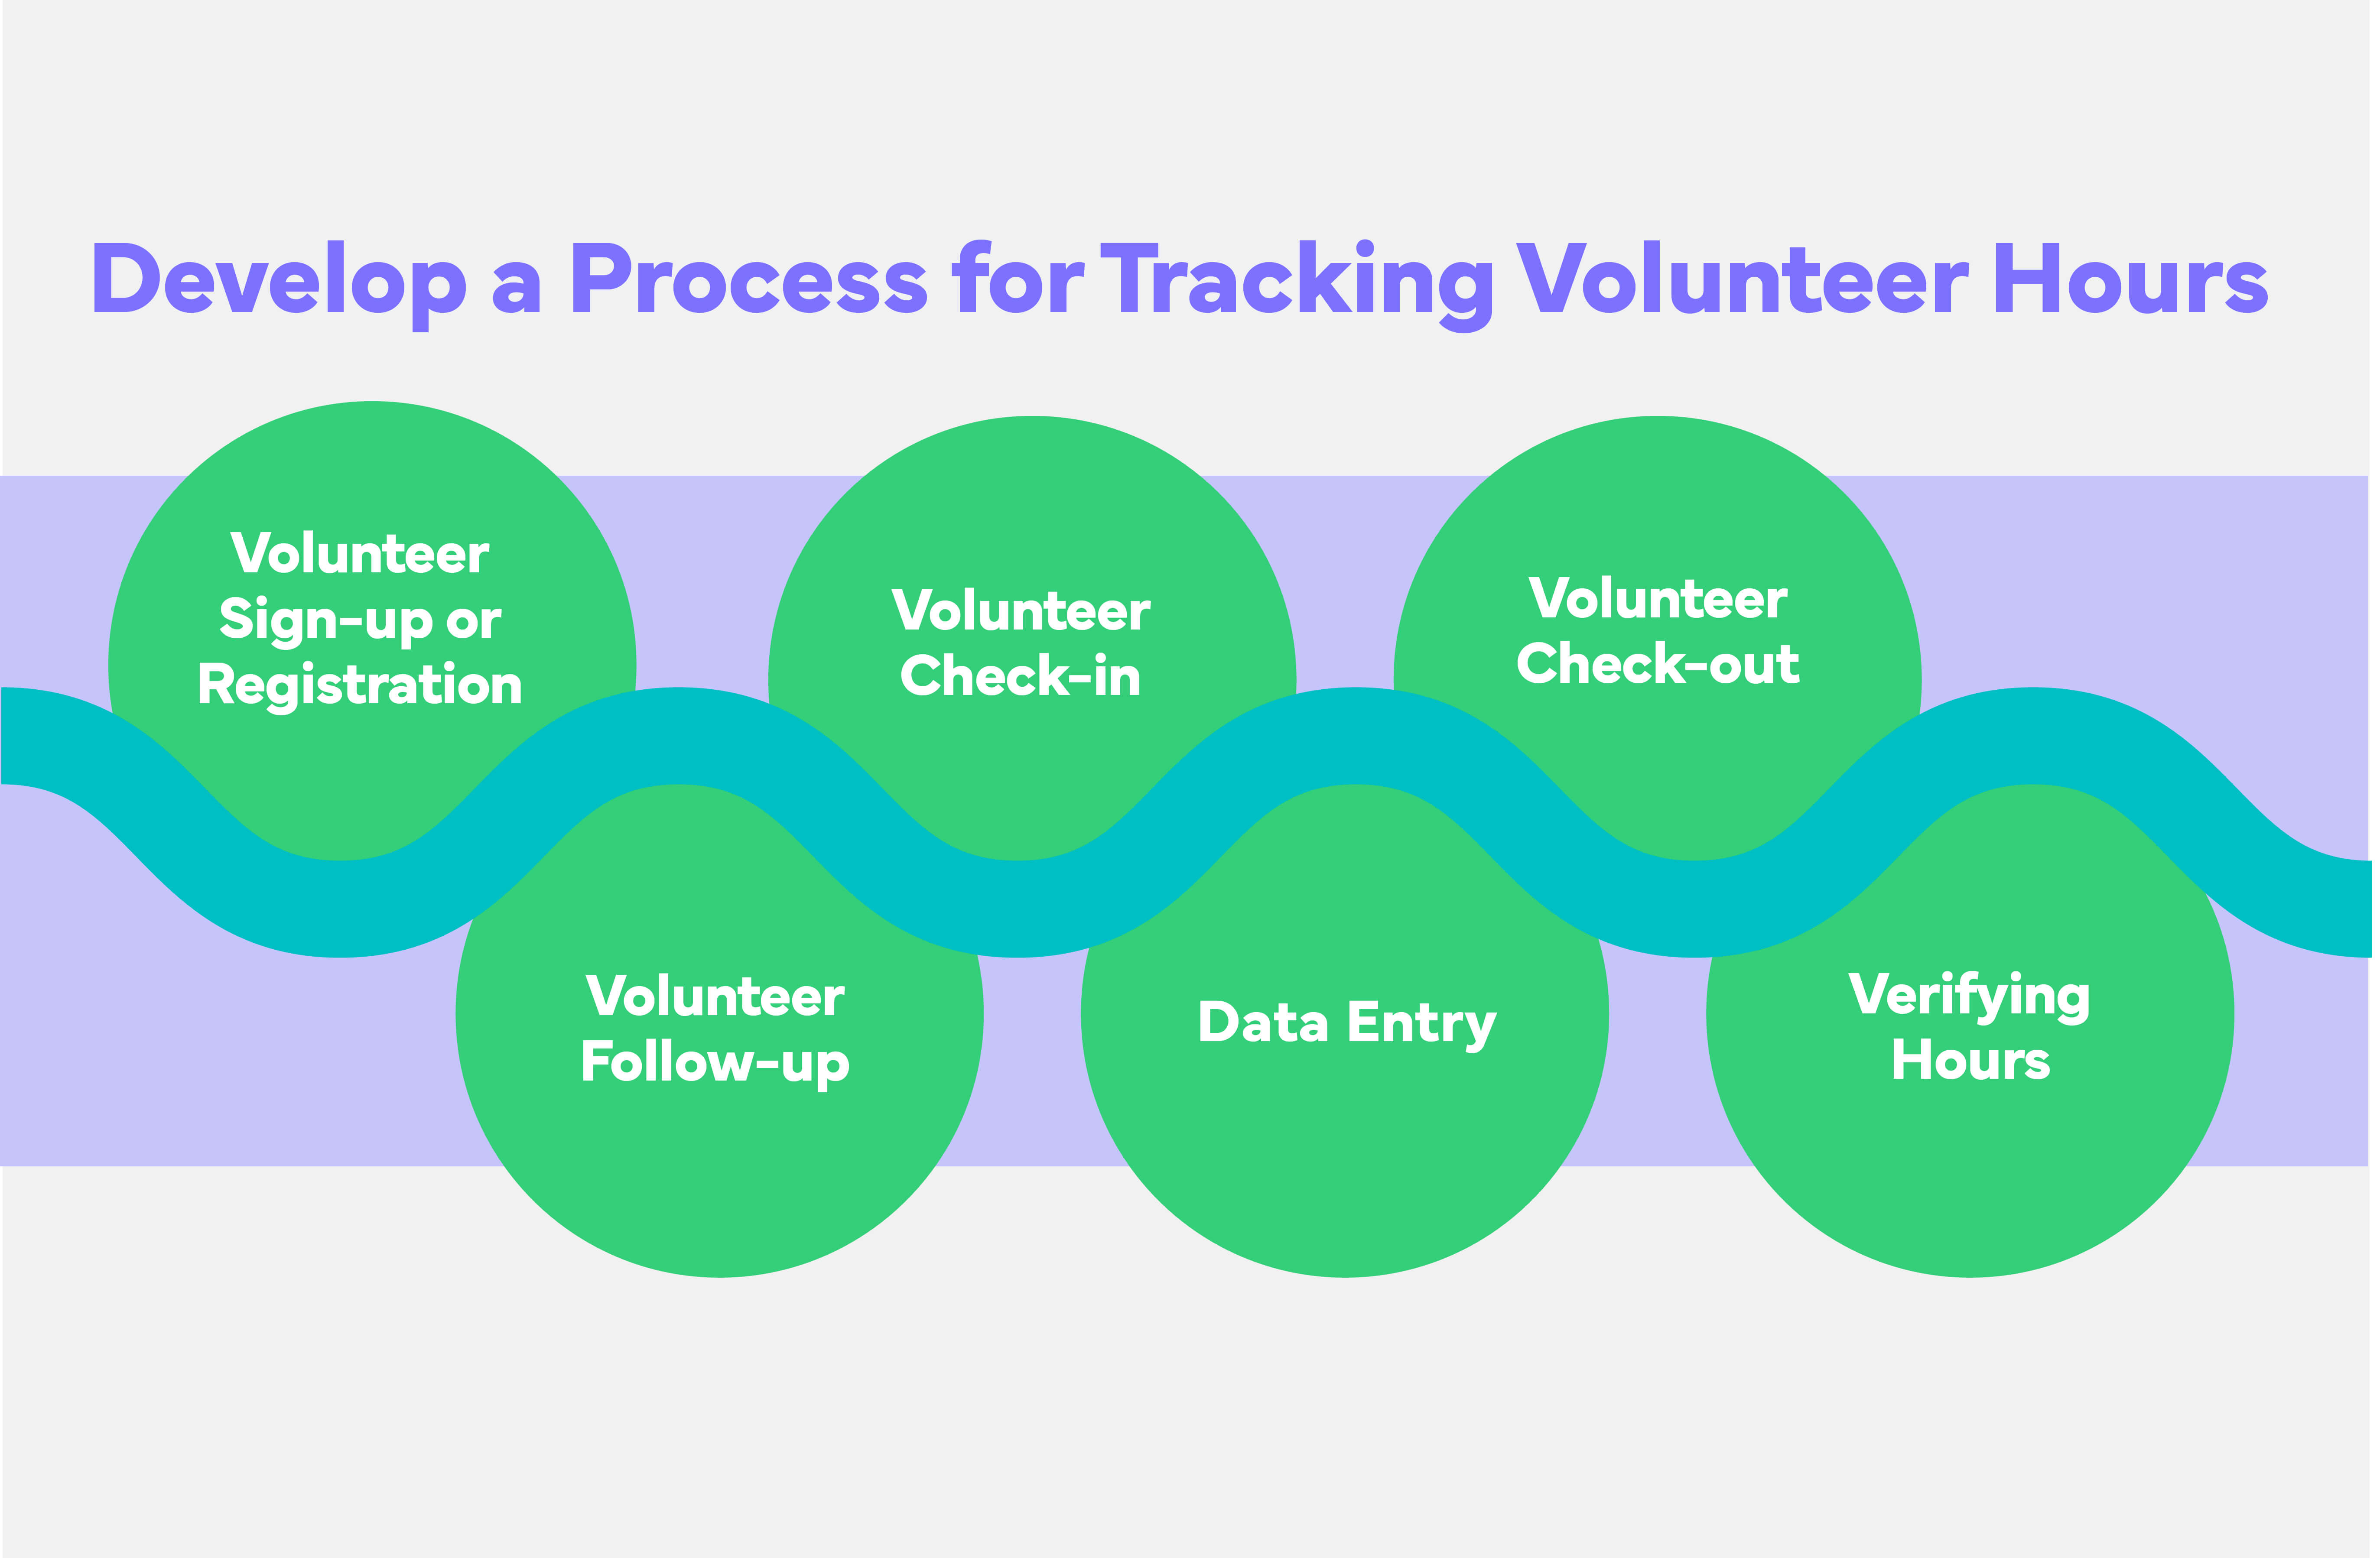 Volunteer hours log and developing a process for tracking volunteer hours